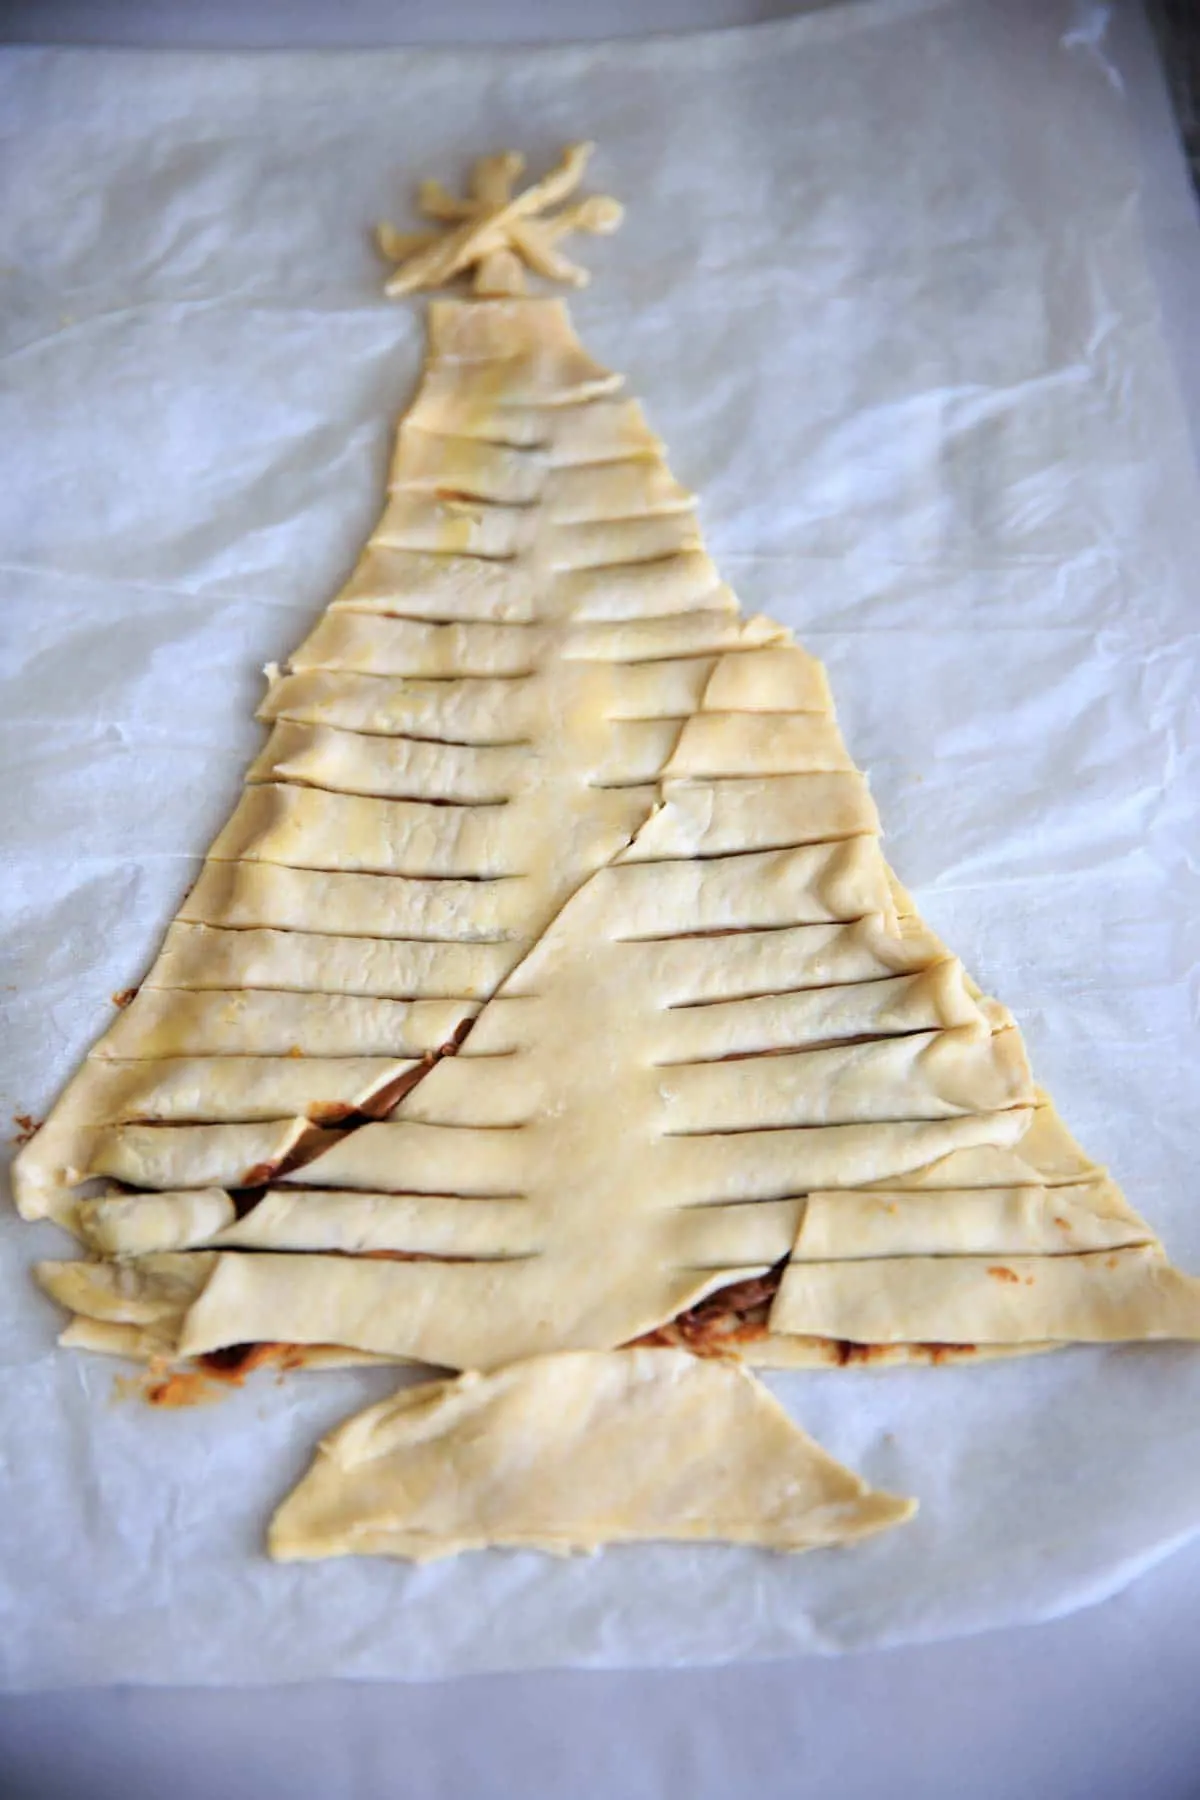 Cover with another layer of puff pastry and cut branches into pastry.